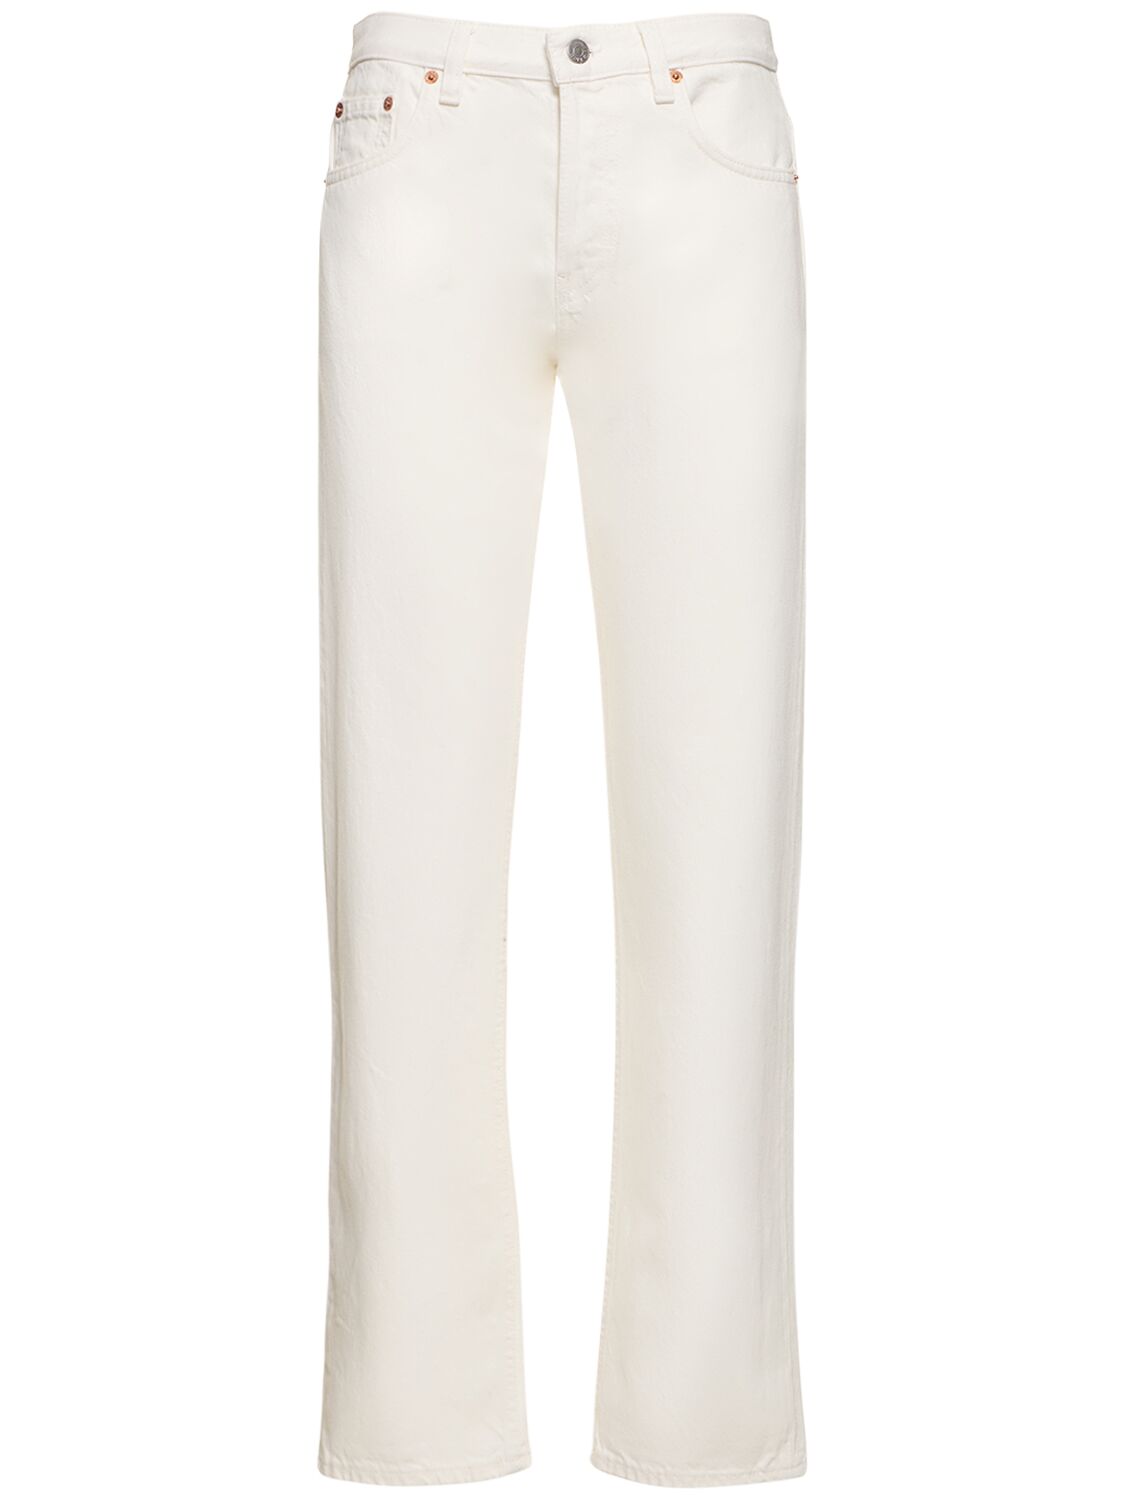 Sporty And Rich Vintage Fit Denim Jeans In White